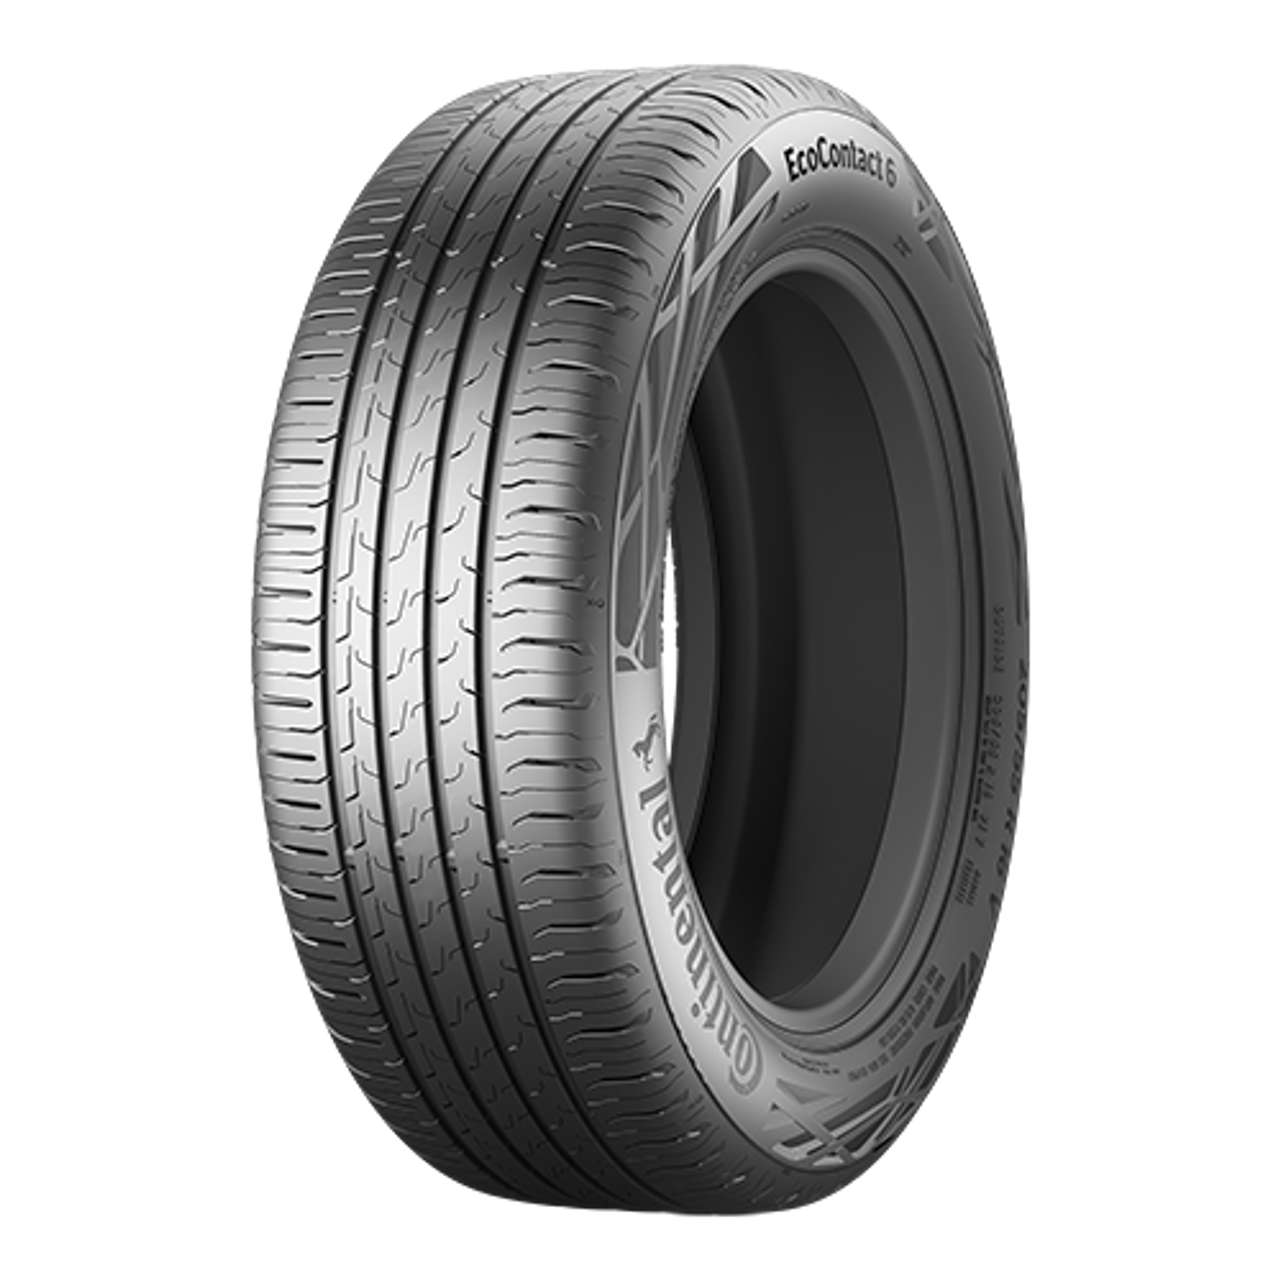 CONTINENTAL ECOCONTACT 6 (EVc) 205/55R16 91V